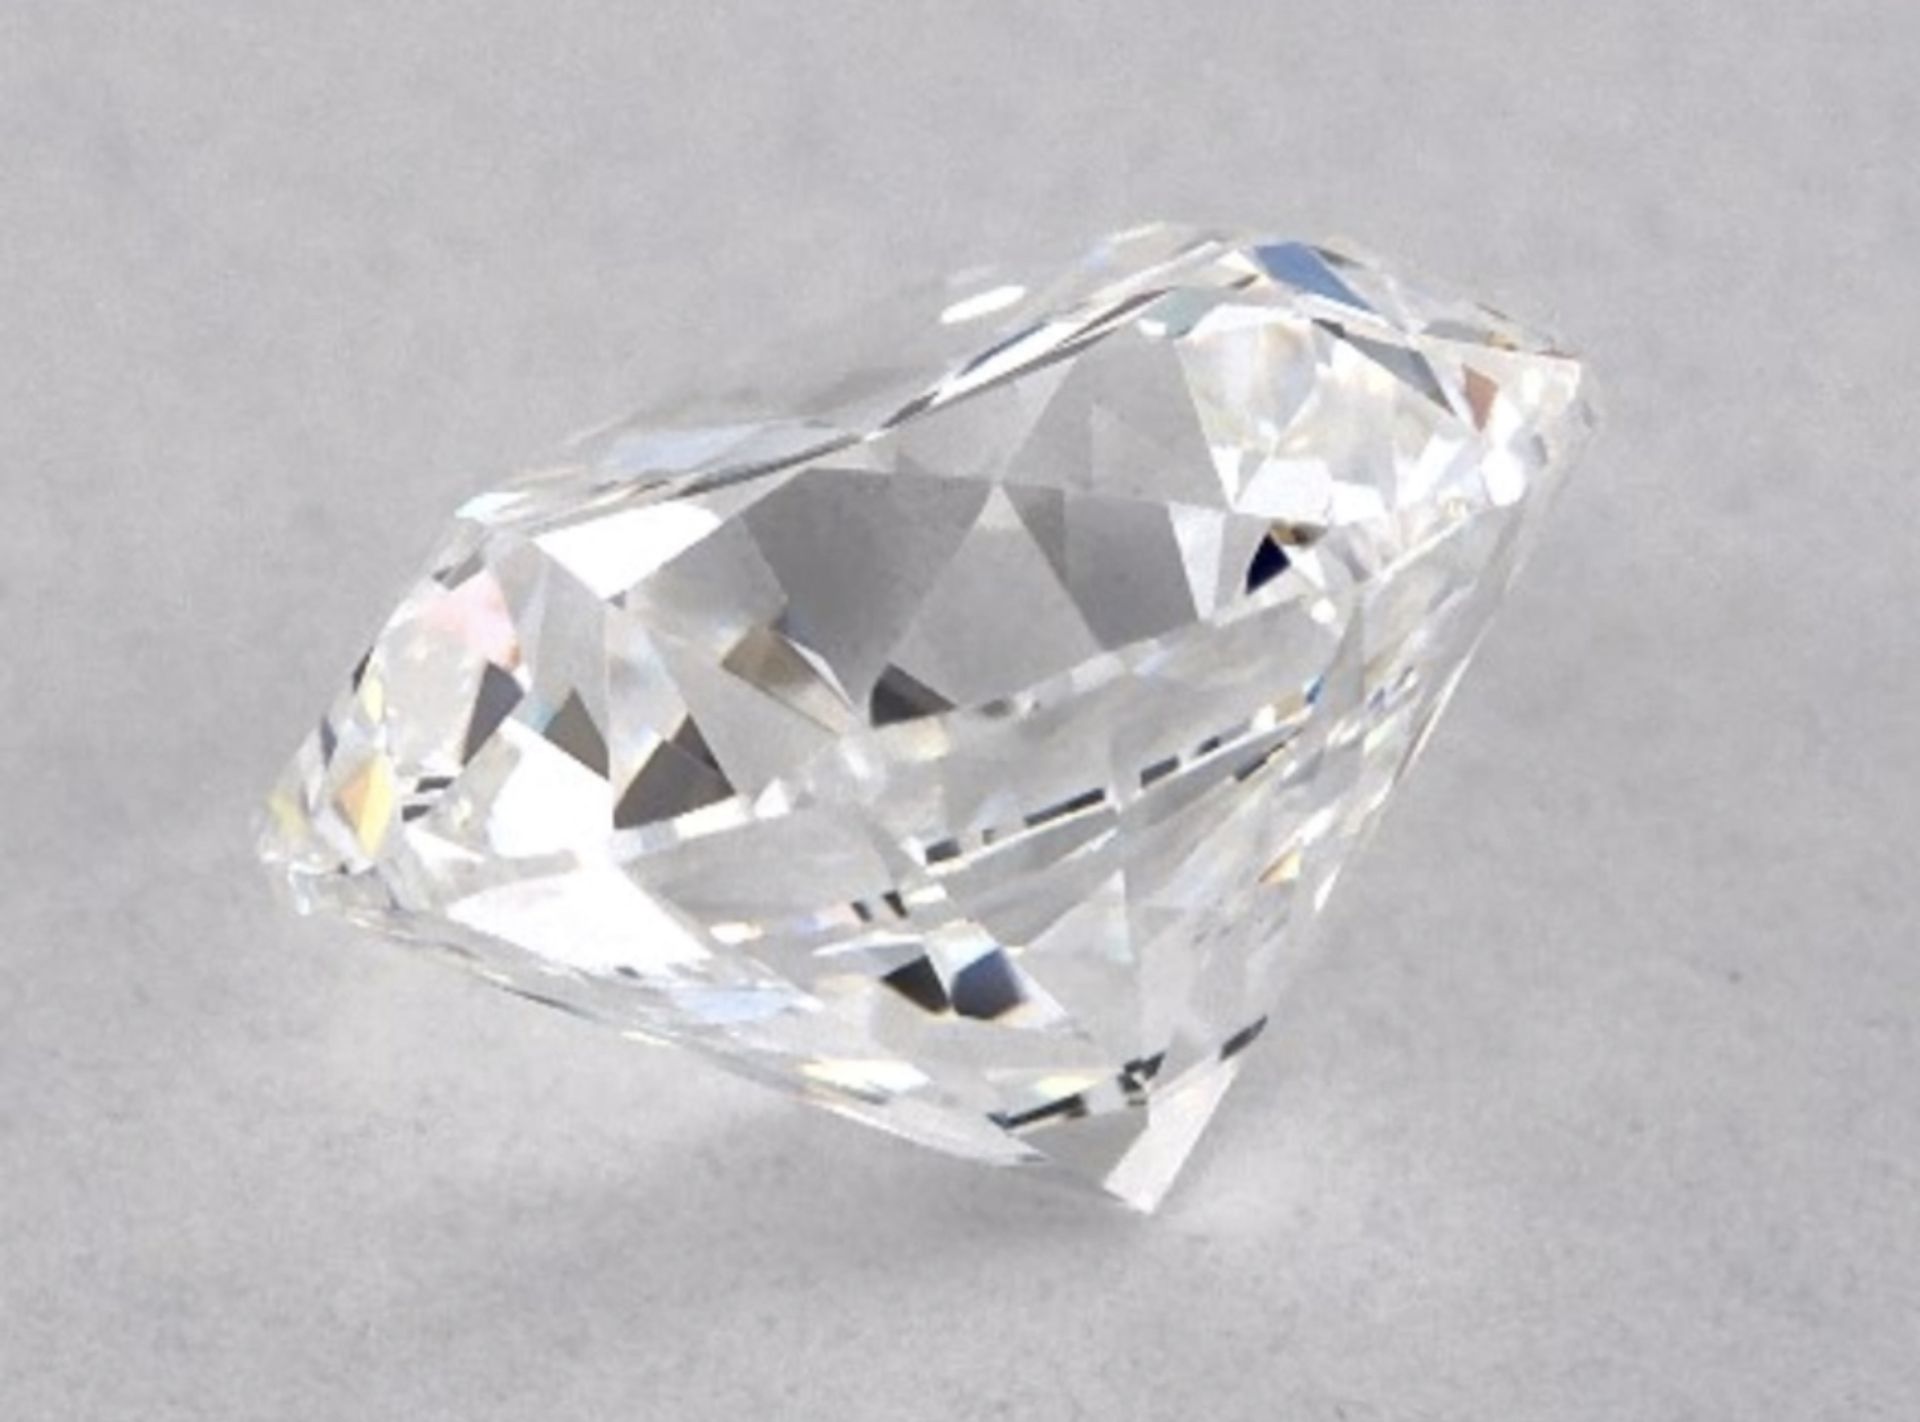 ** ON SALE ** Certified Brilliant Cut Diamond 2.03 CT ( Natural ) VS1 H colour - Full Certificate - Image 5 of 6